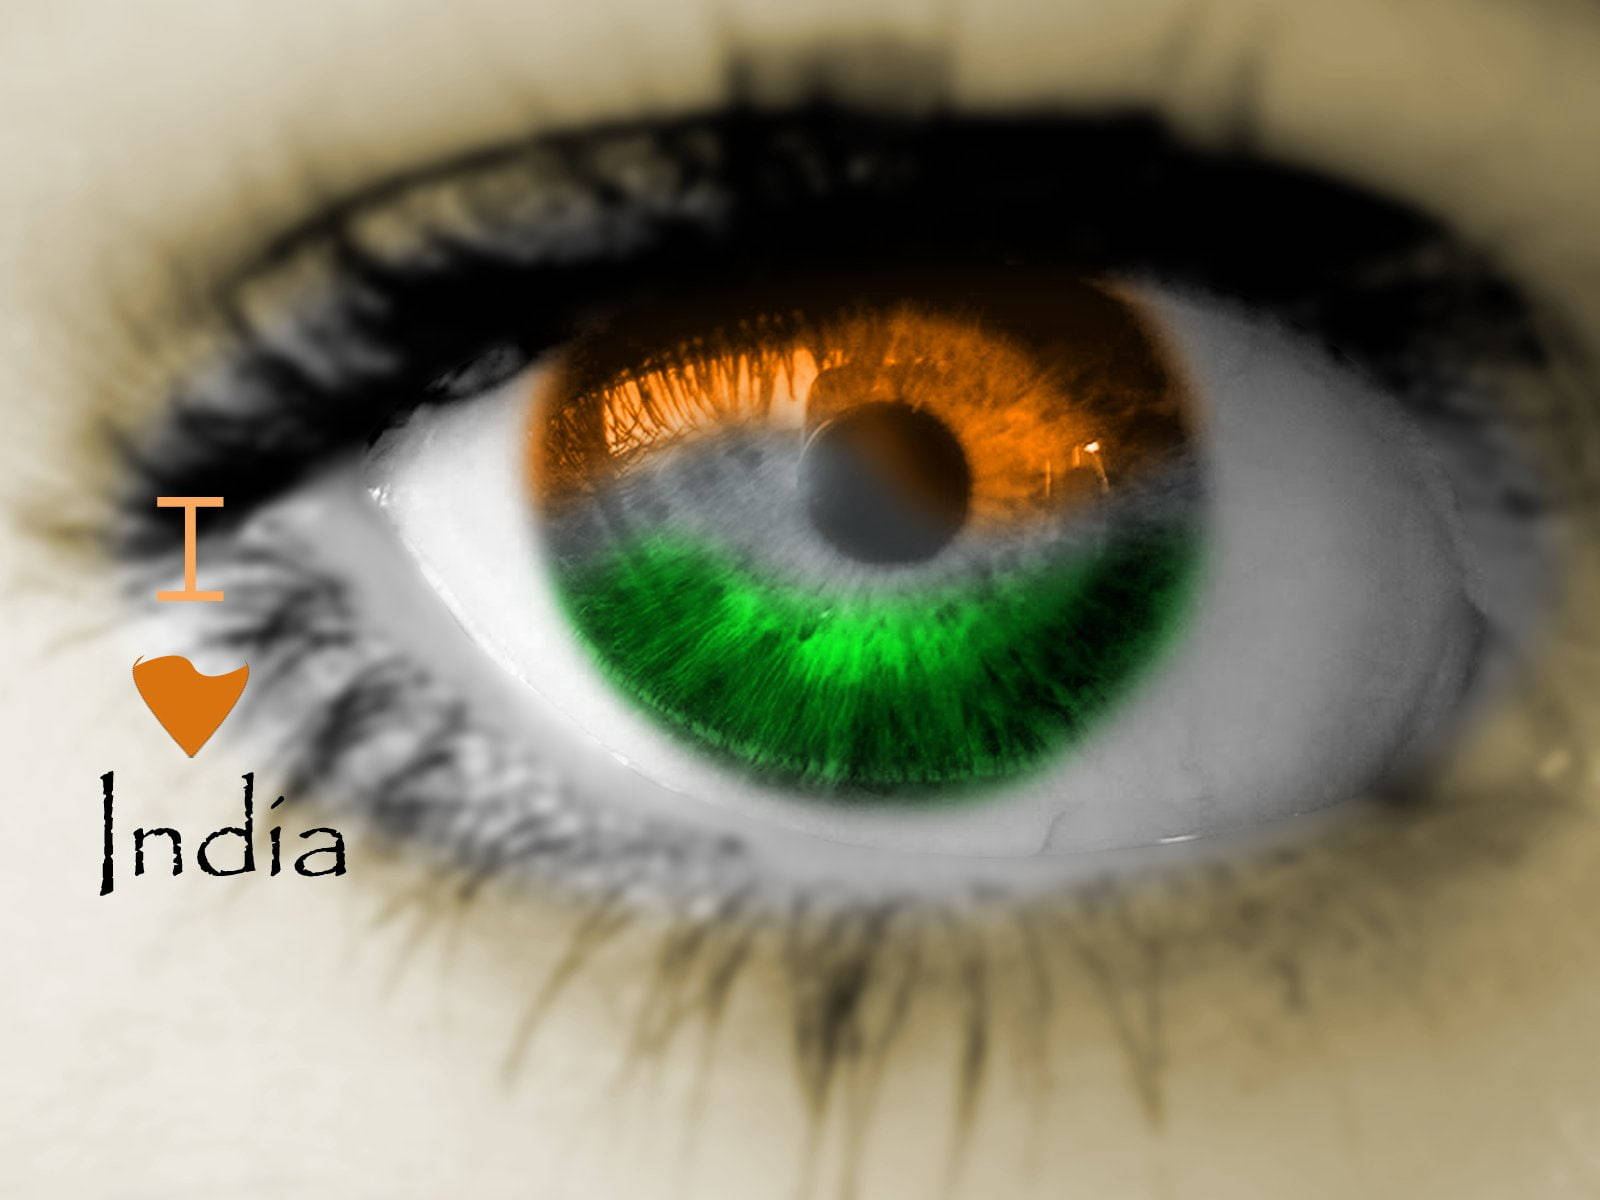 Indian Pride: A Stunning Reflection Of The Indian Flag On A Human Eye.